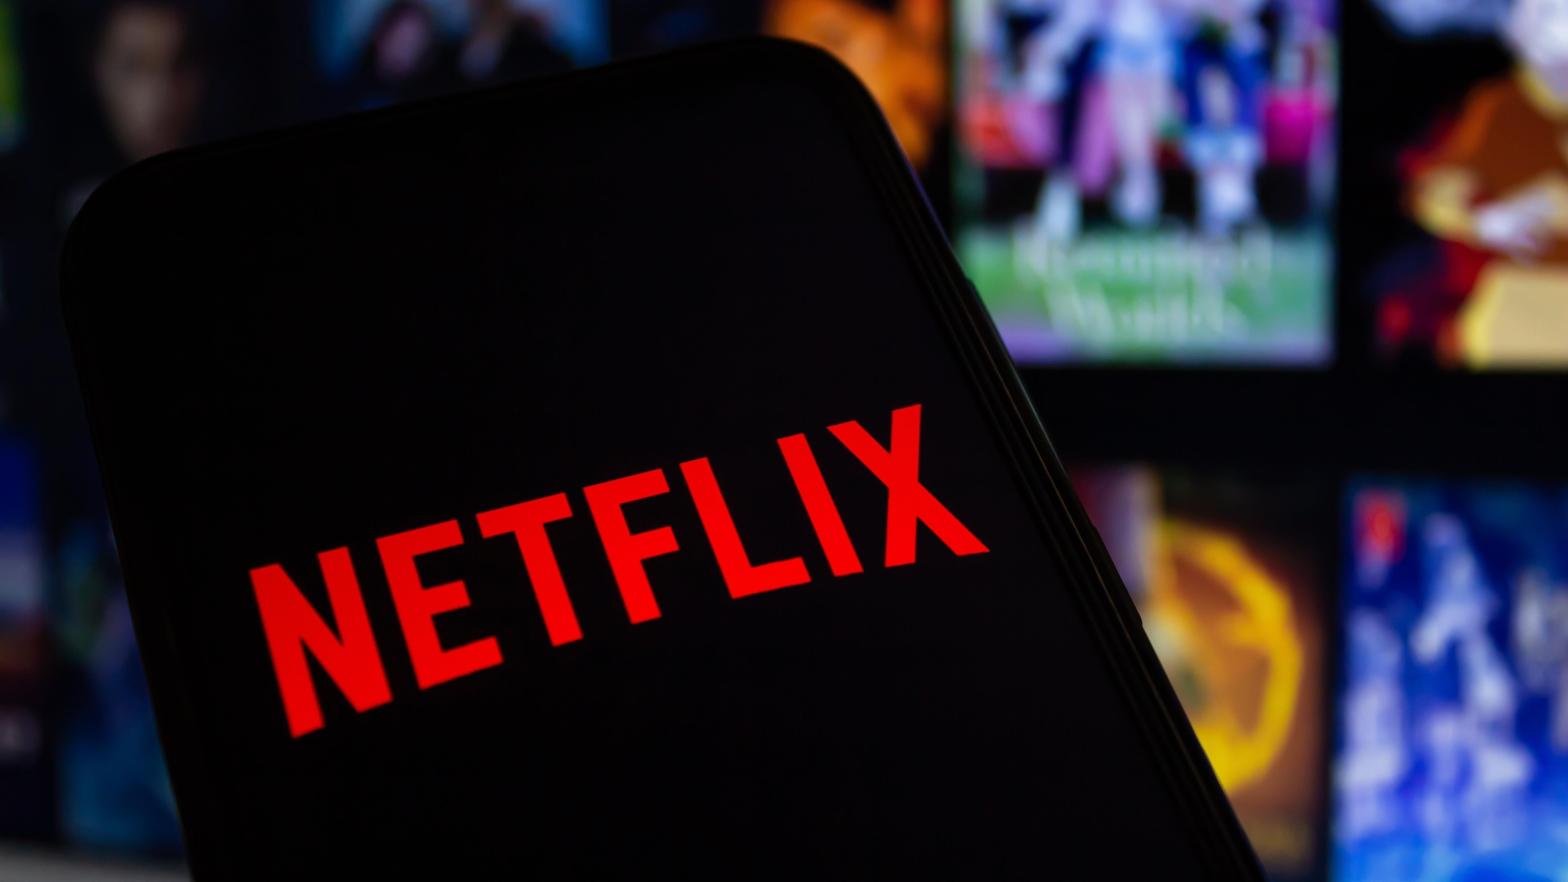 Netflix is now slowly rolling out password sharing restrictions in countries across the world, gearing up to its big change coming to the U.S. market. (Photo: Emre Akkoyun, Shutterstock)